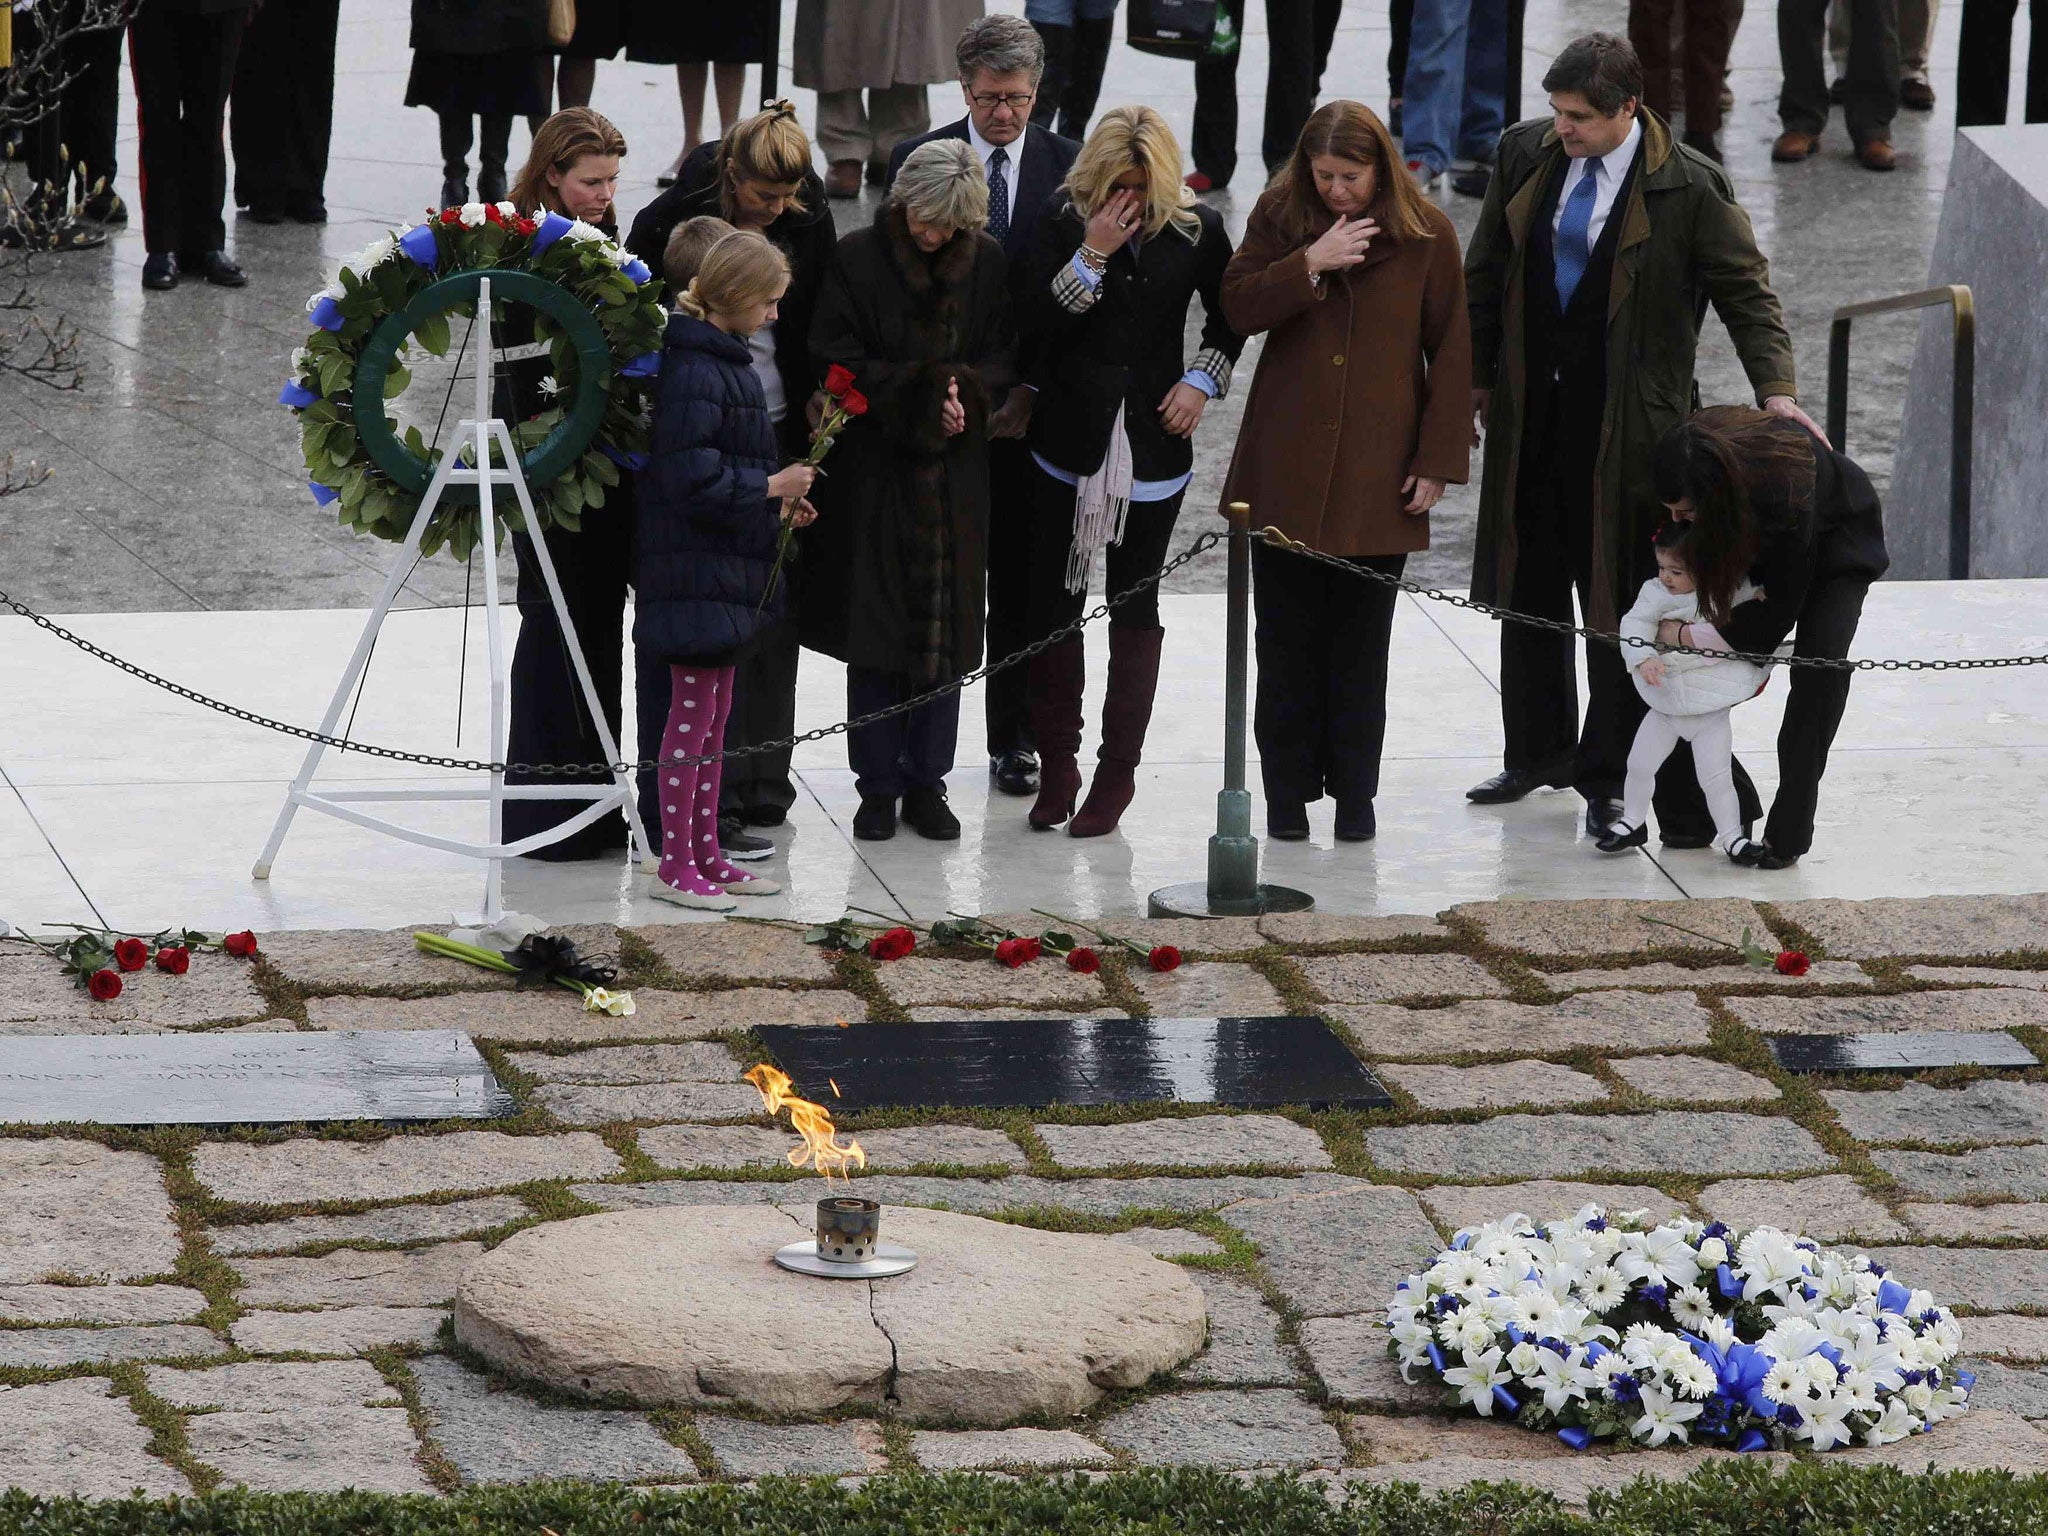 Members of the Kennedy family pay their respects at Arlington National Cemetery to mark the 50th anniversary of the assassination of former U.S. President John F. Kennedy